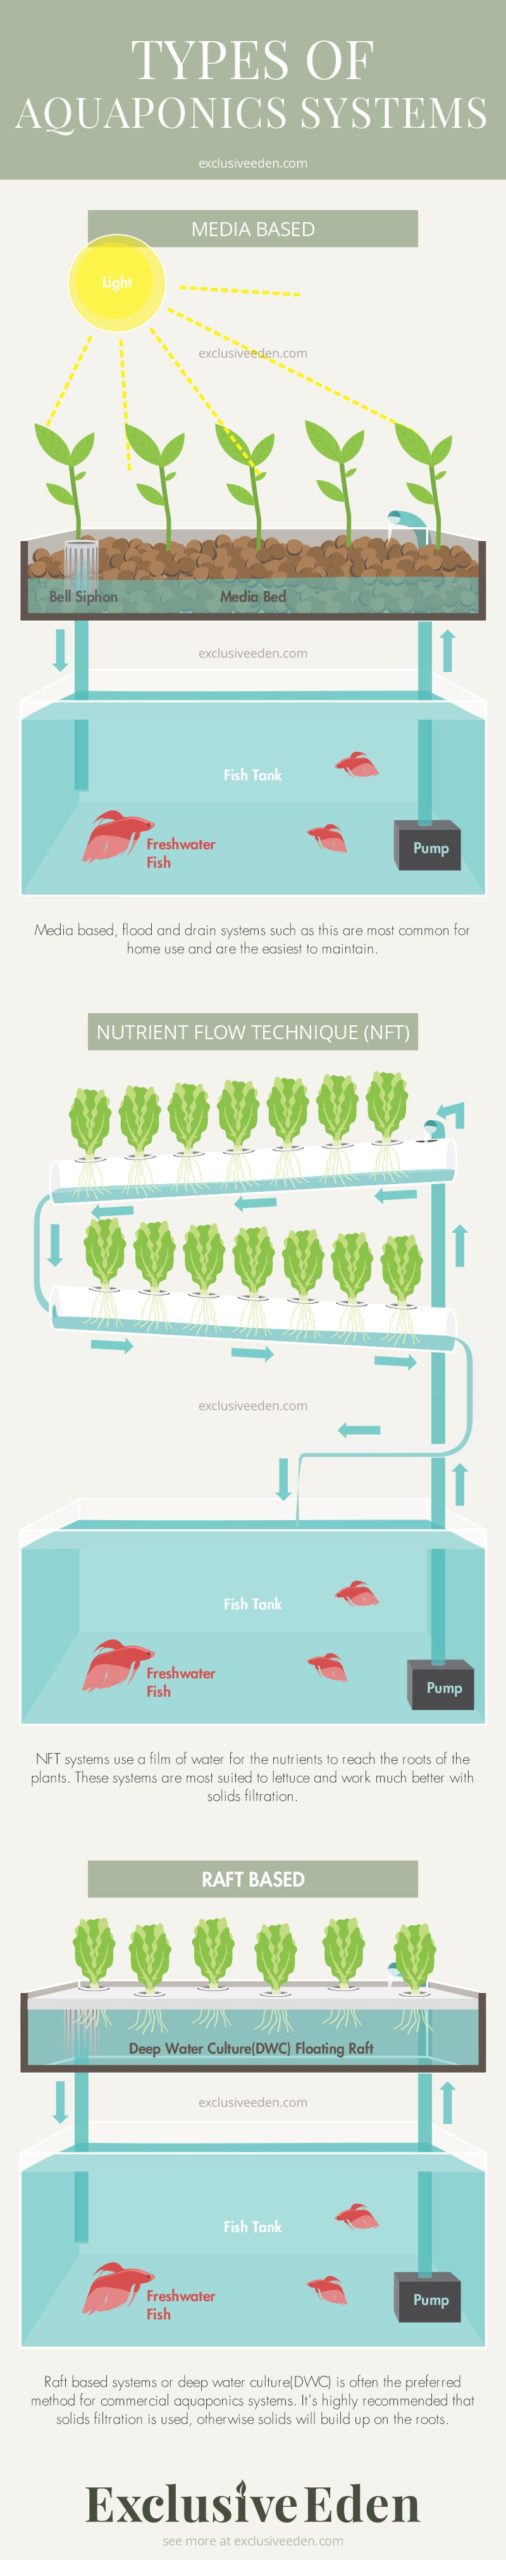 An infographic on the types of Aquaponic systems.